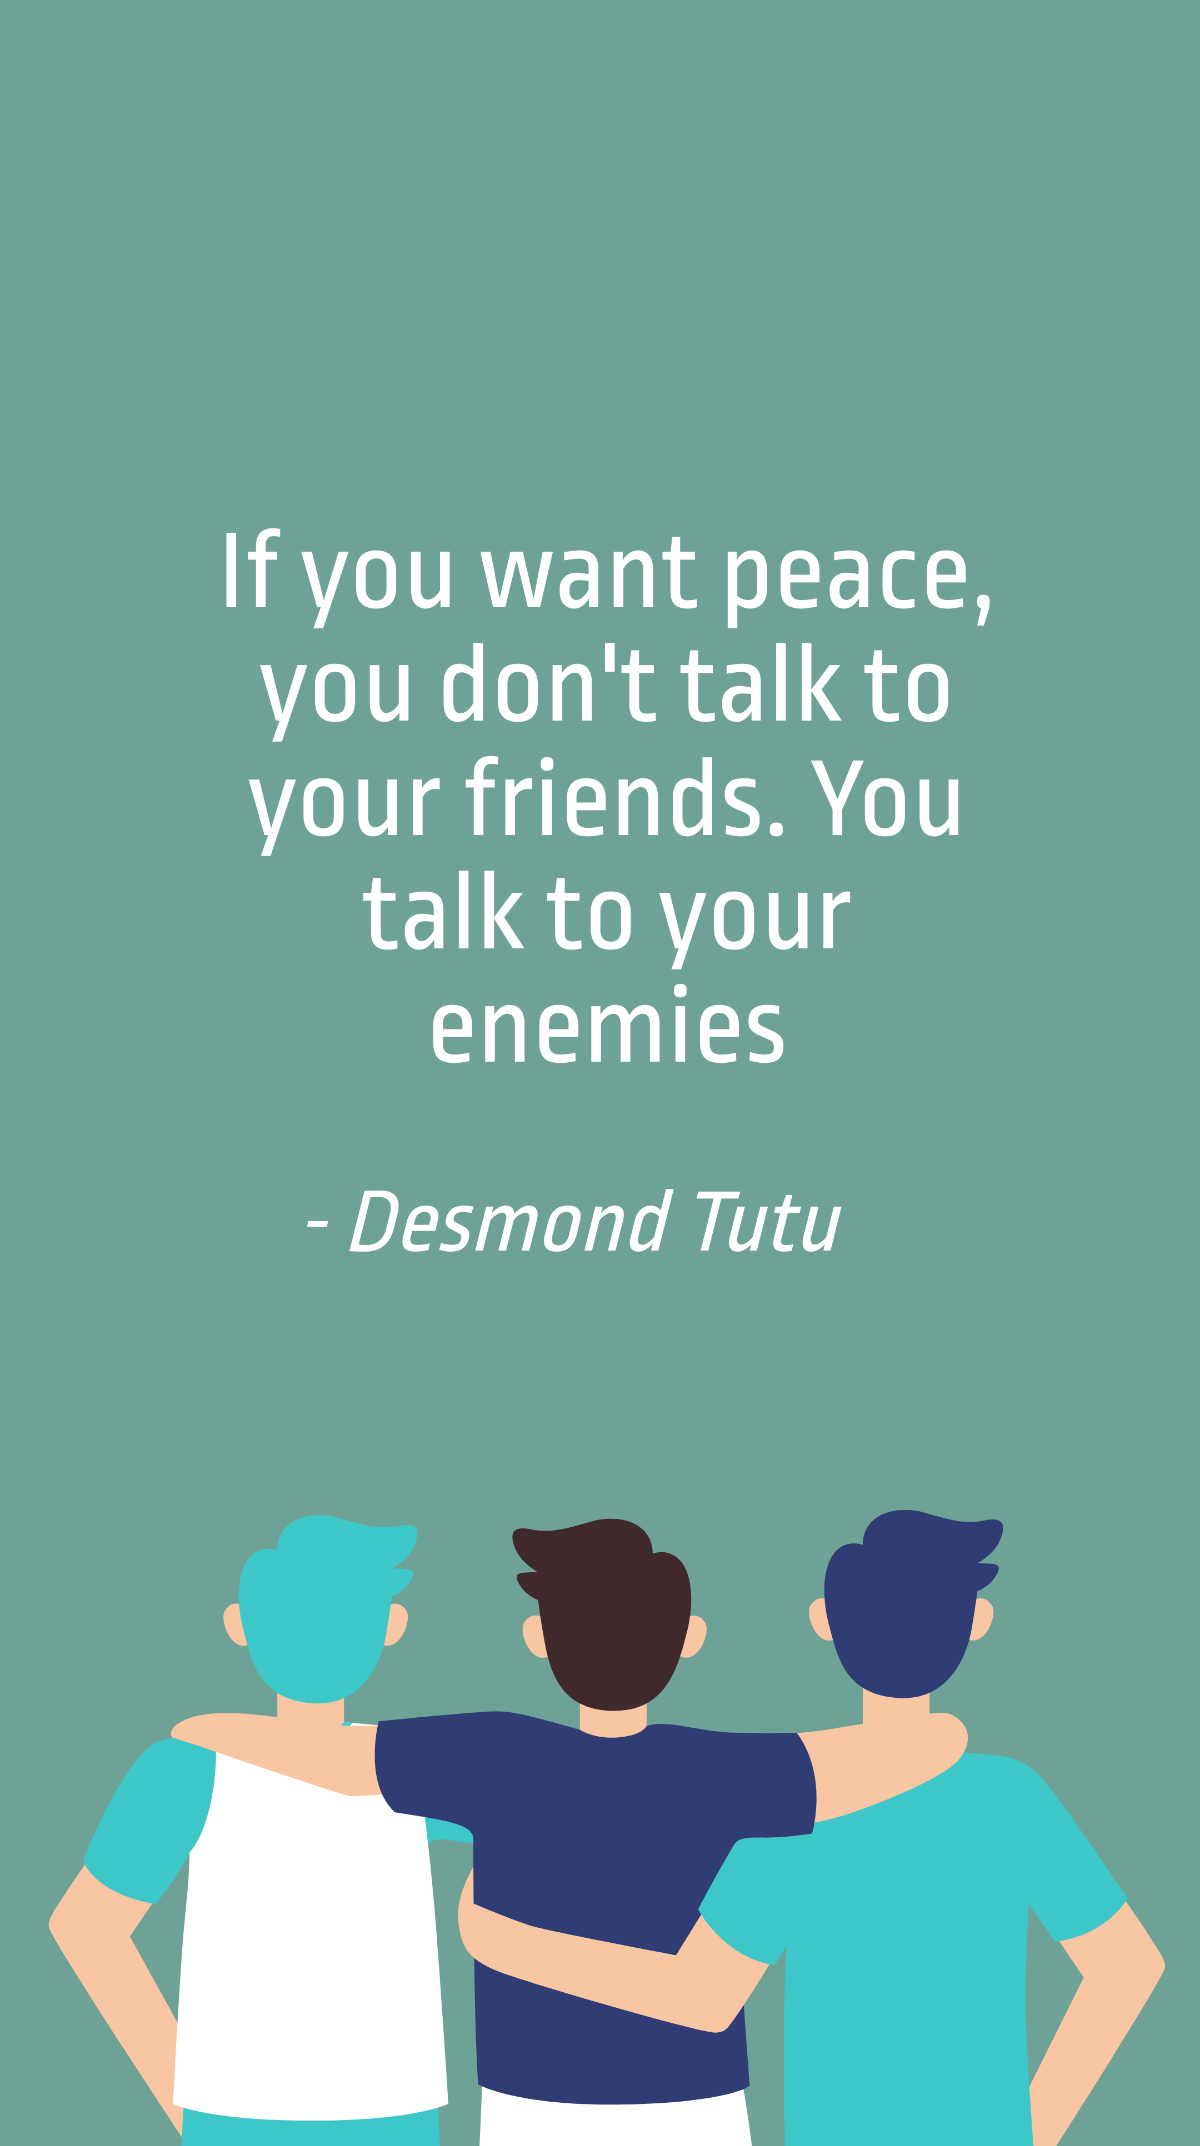 Free Desmond Tutu - If you want peace, you don't talk to your friends. You talk to your enemies Template